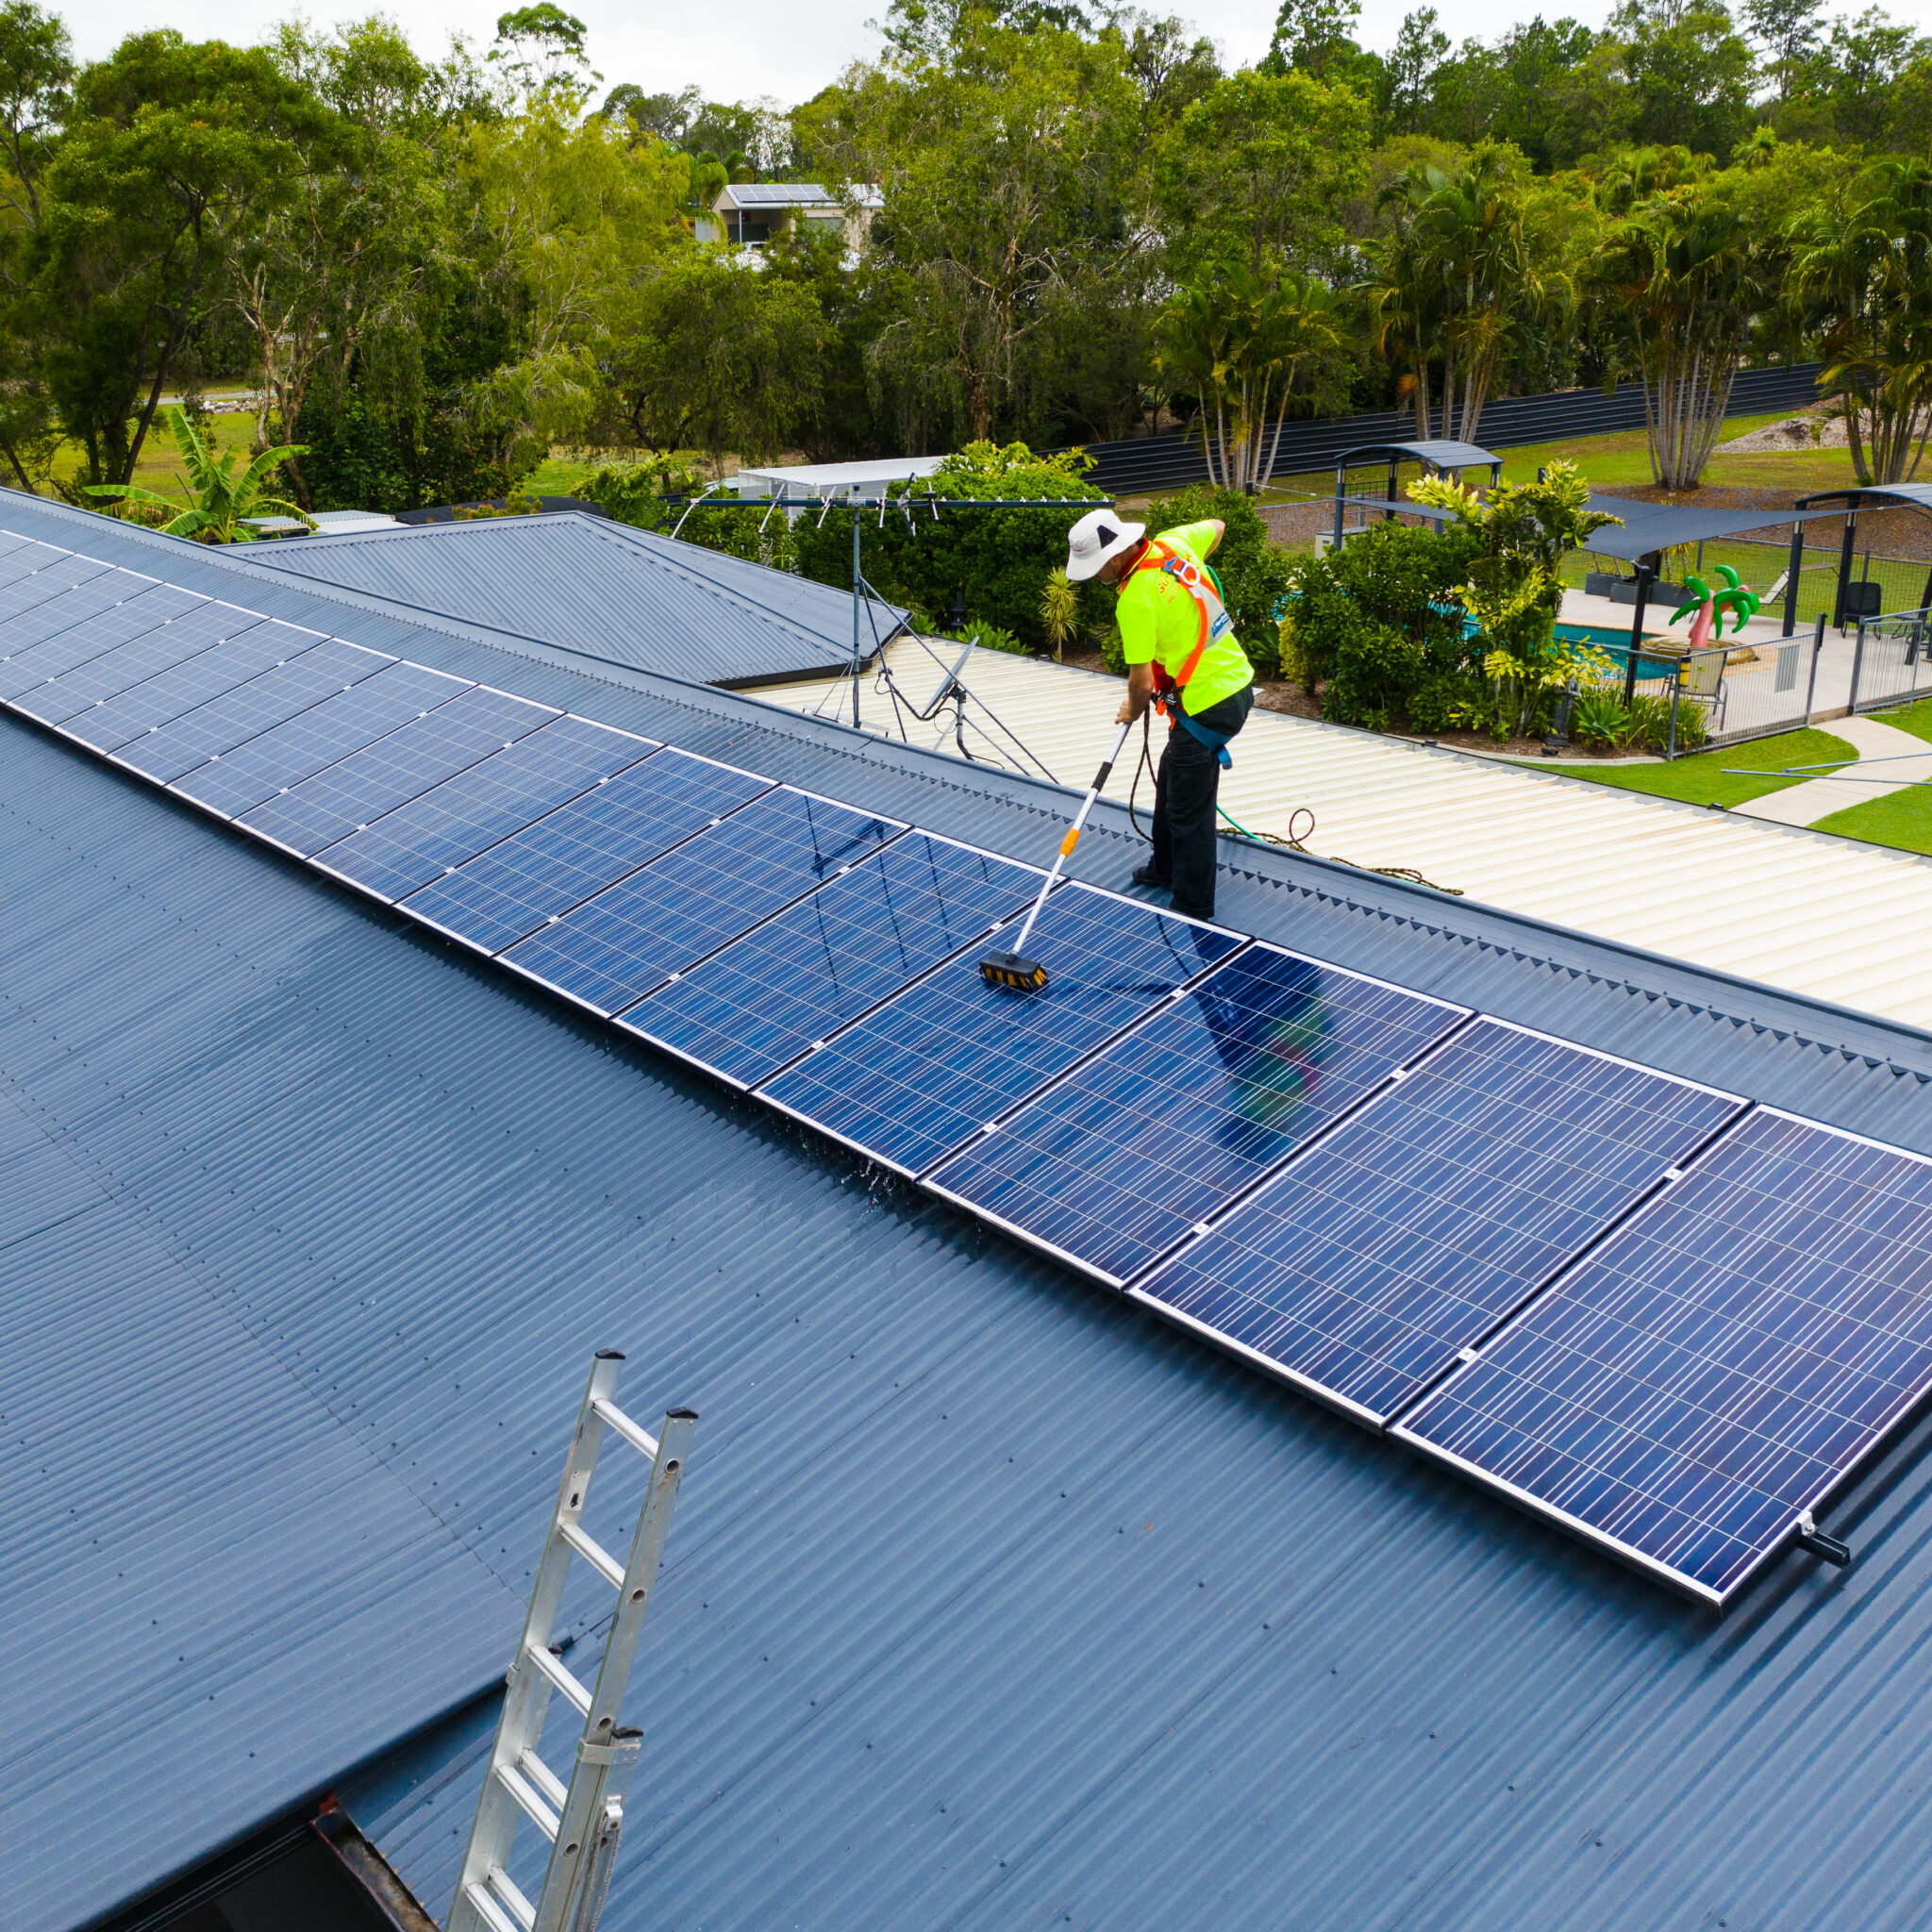 The Best Process For Cleaning Solar Panels